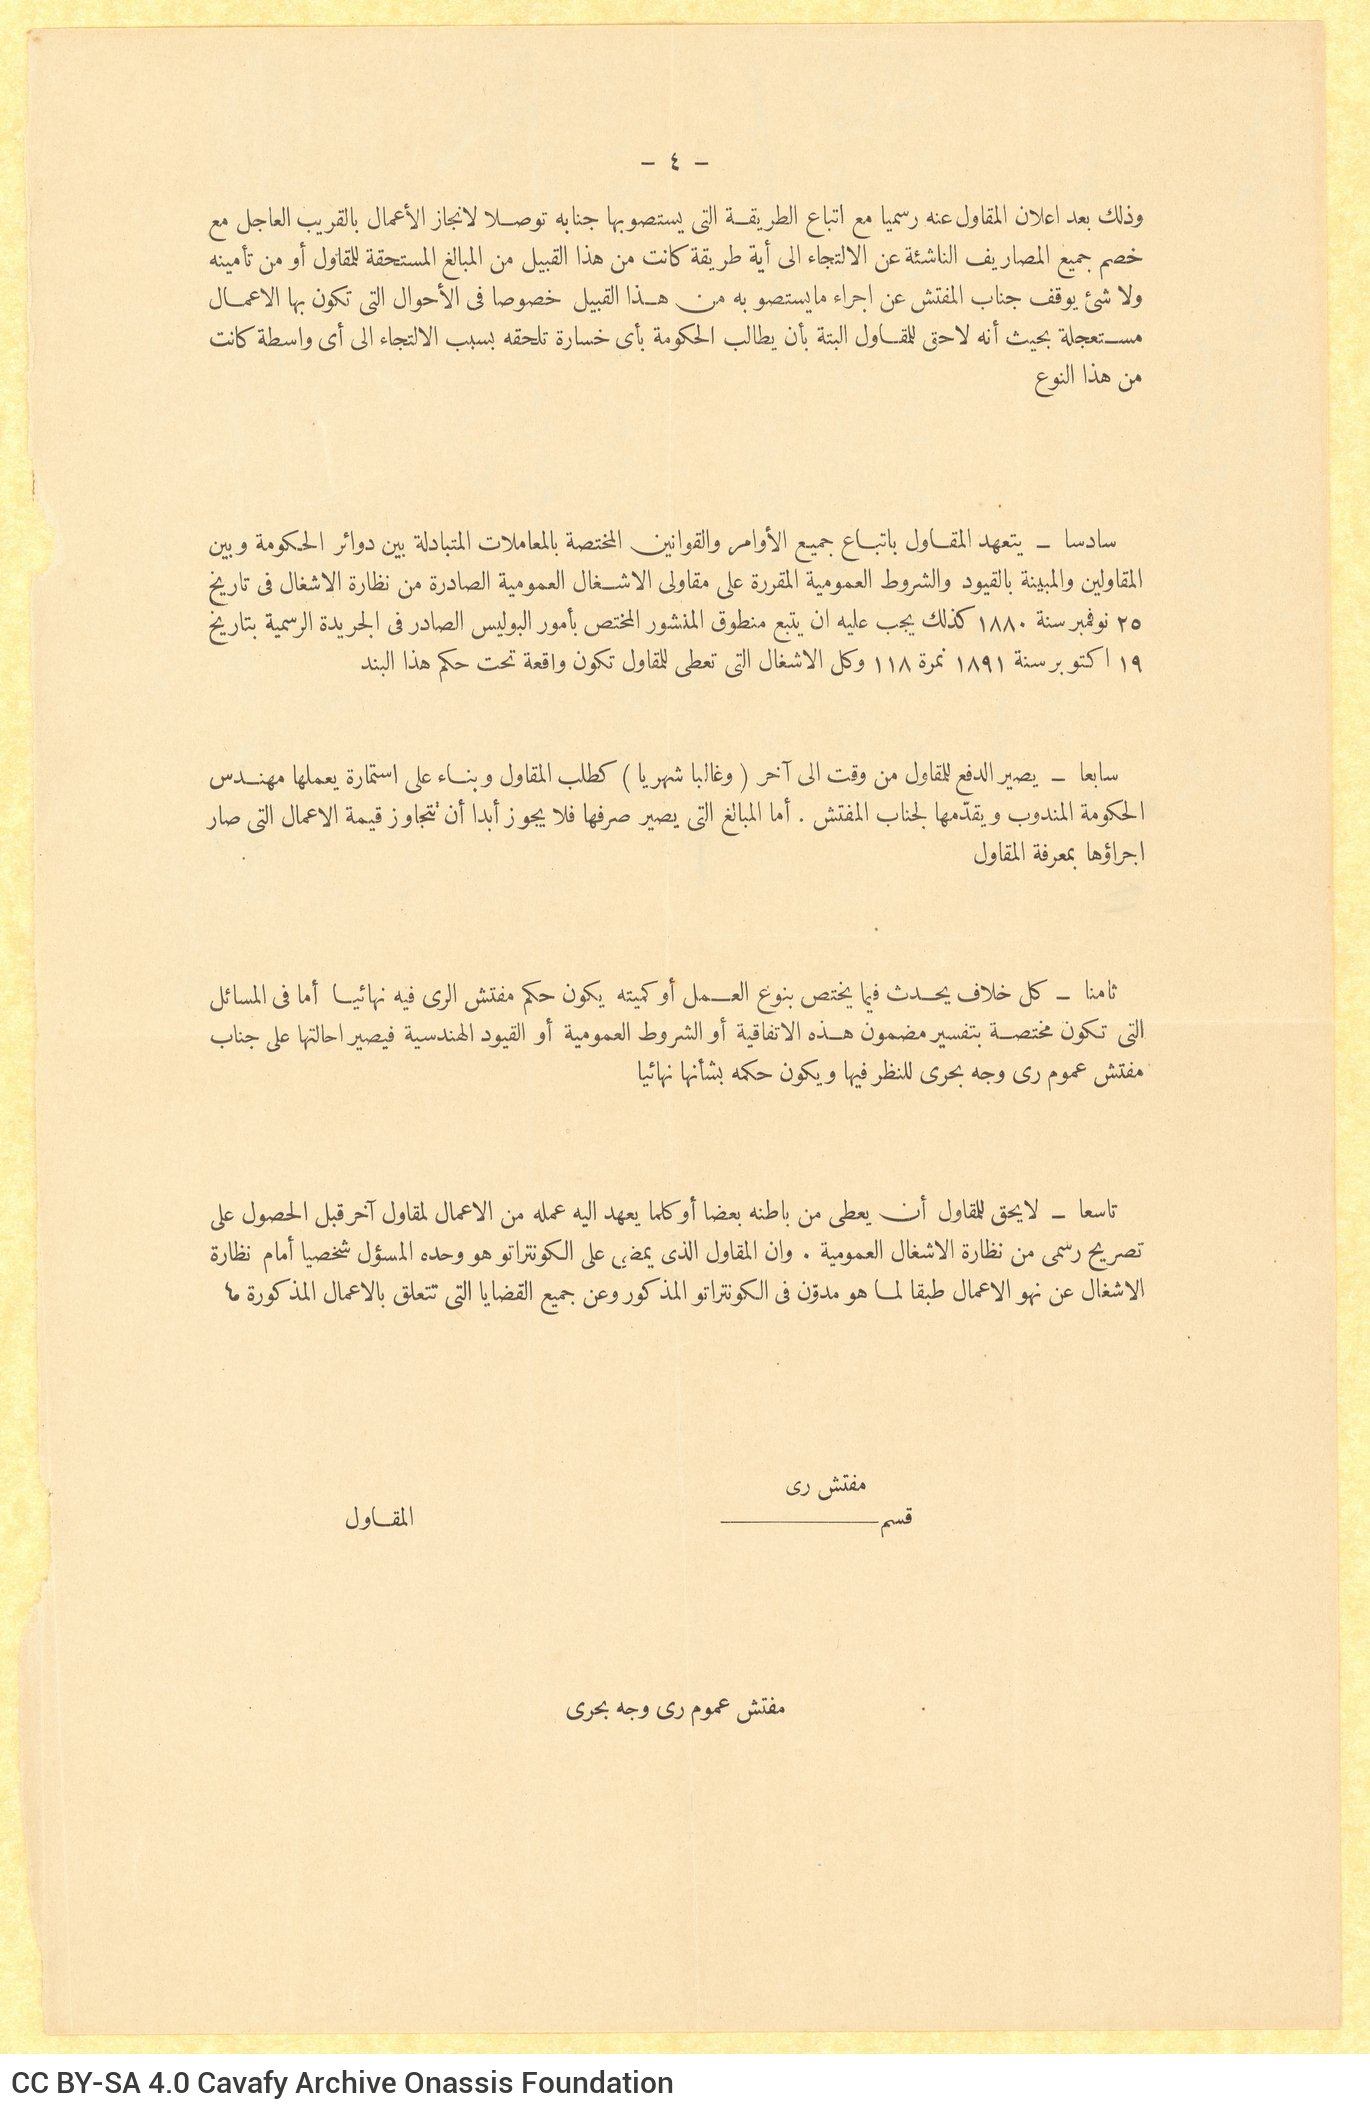 Handwritten draft letter by Cavafy to Alekos [Singopoulo] on the verso of a printed medium with text in Arabic. The poet revi